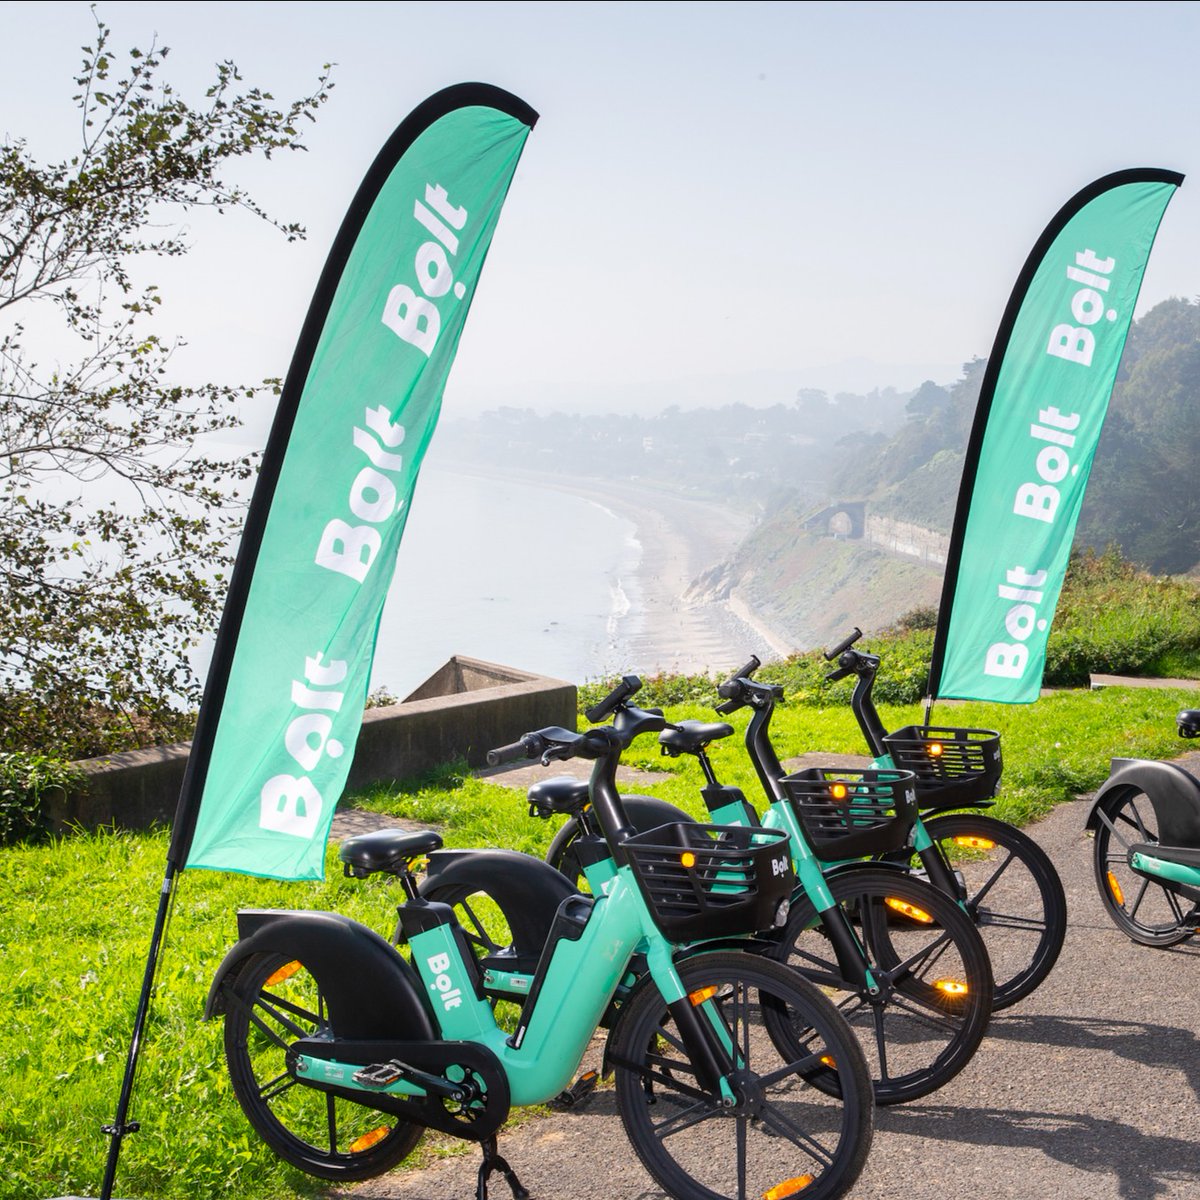 To celebrate National Bike Week, Bolt and dlr are offering all Bolt users free E-Bike trips (1 return journey, up to 20mins each way) throughout dlr tomorrow. Please use discount code: BIKEWEEK24 For more information please visit: bit.ly/dlrBoltBikeWeek #BikeWeek @BoltApp